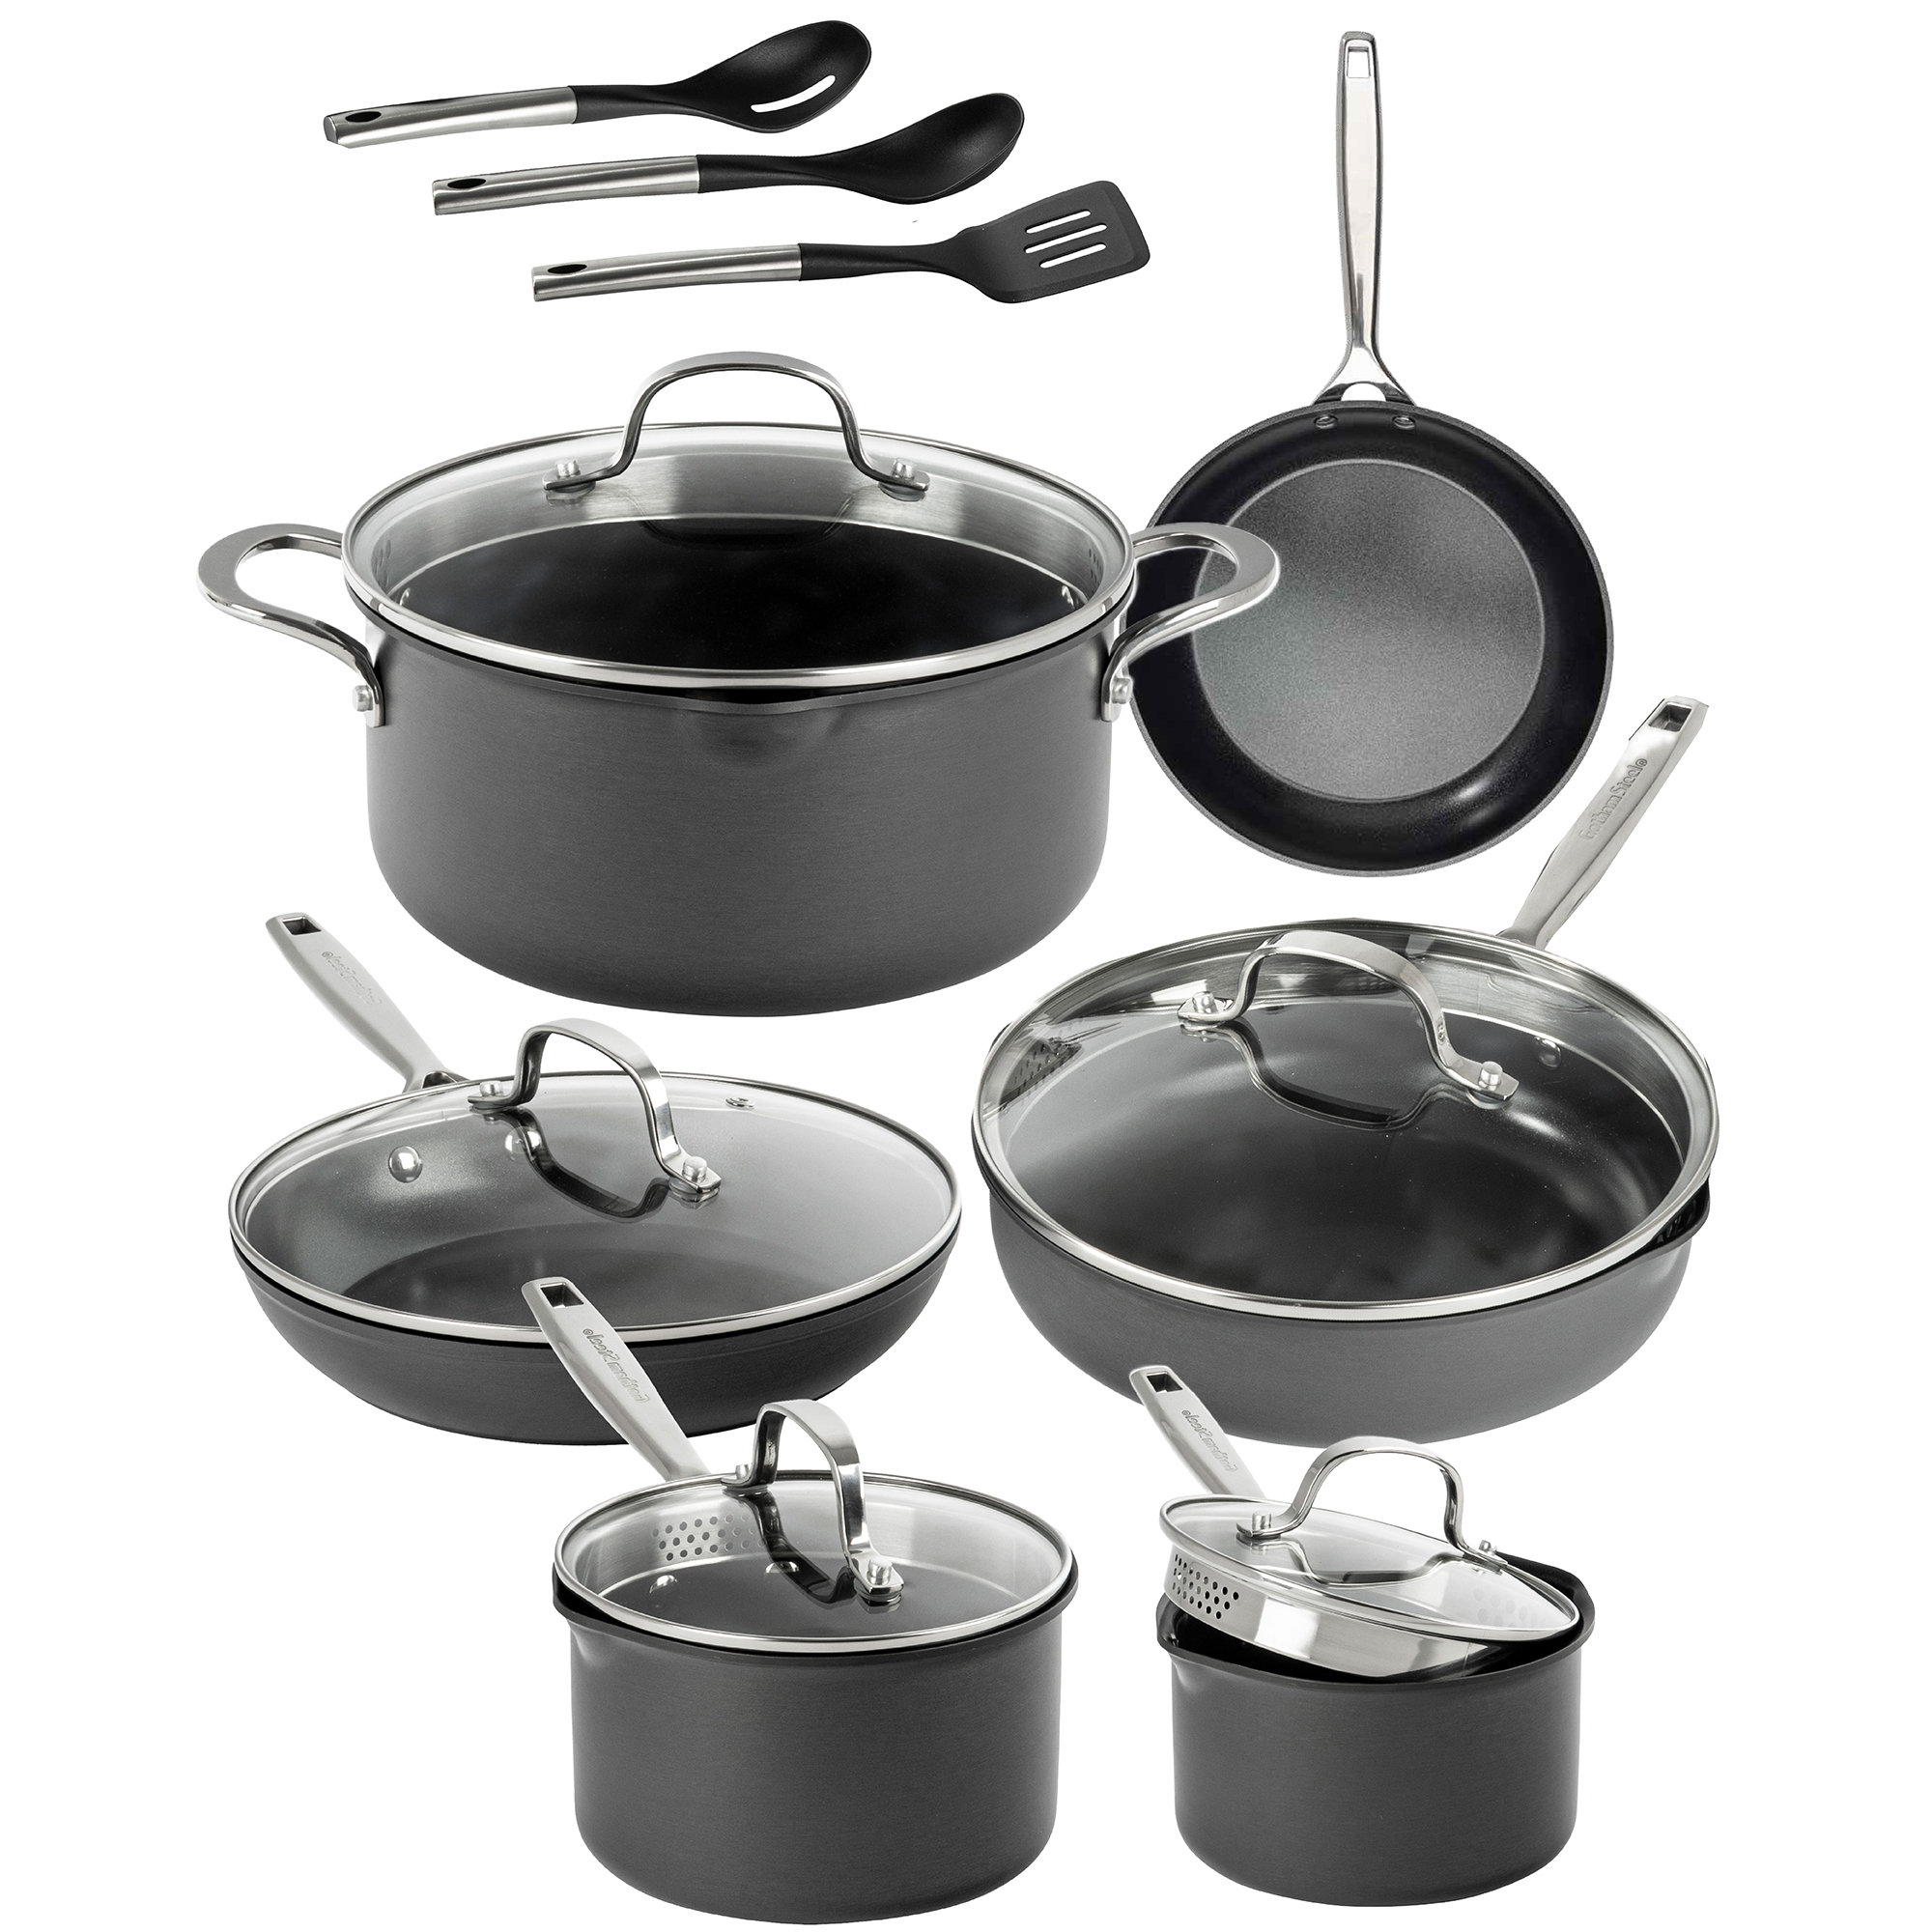 Gotham Steel Natural Collection 15-Piece Aluminum Ultra